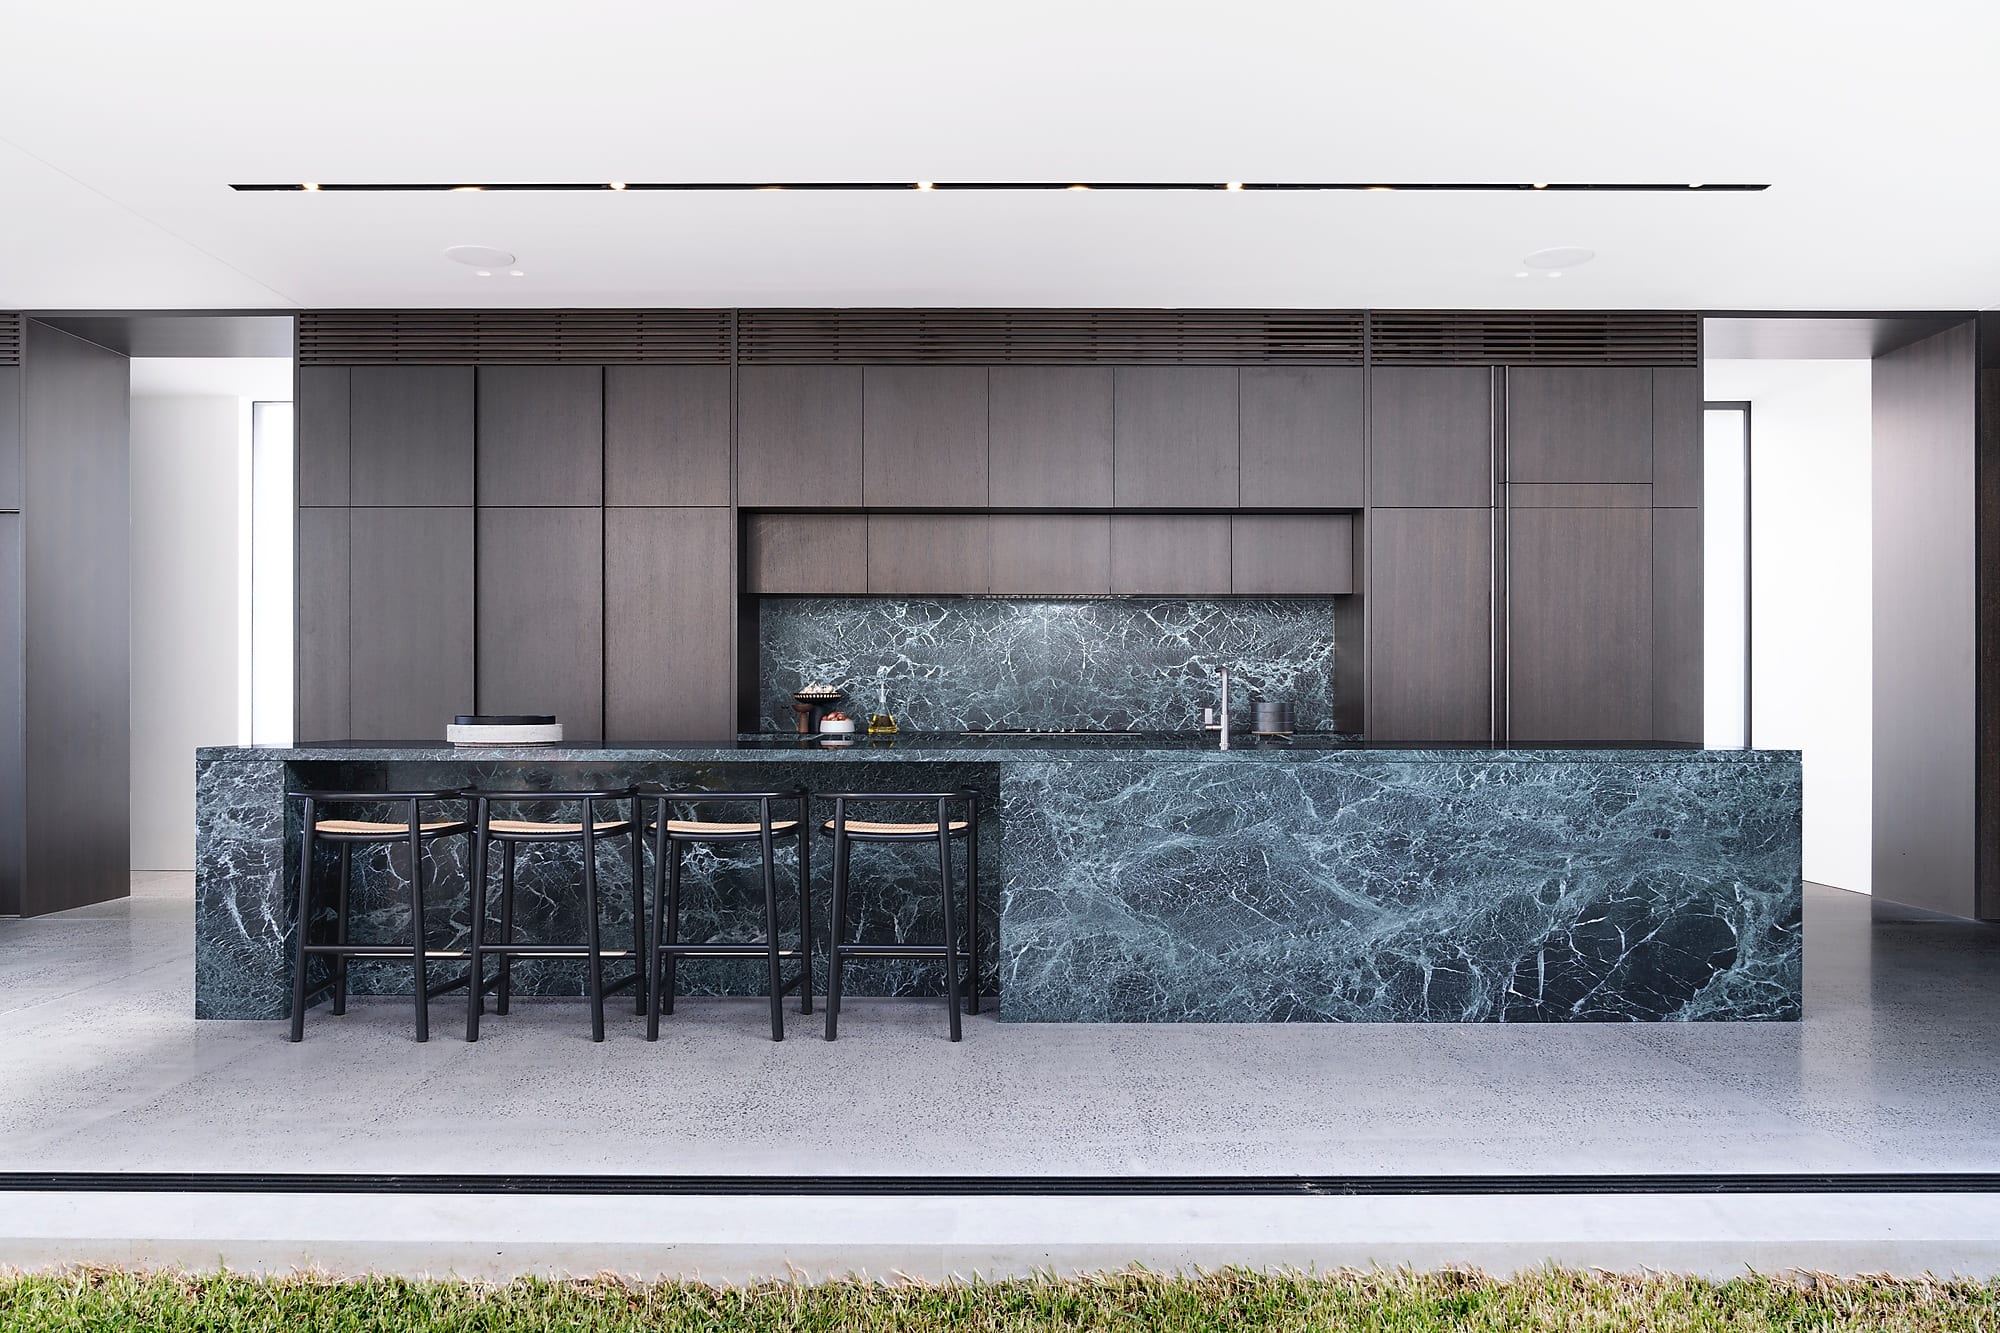 Bronte Terraced House features off-form concrete which provides a feeling of groundedness, timber screens, glazing and charcoal metal surfaces provide textural contrast.